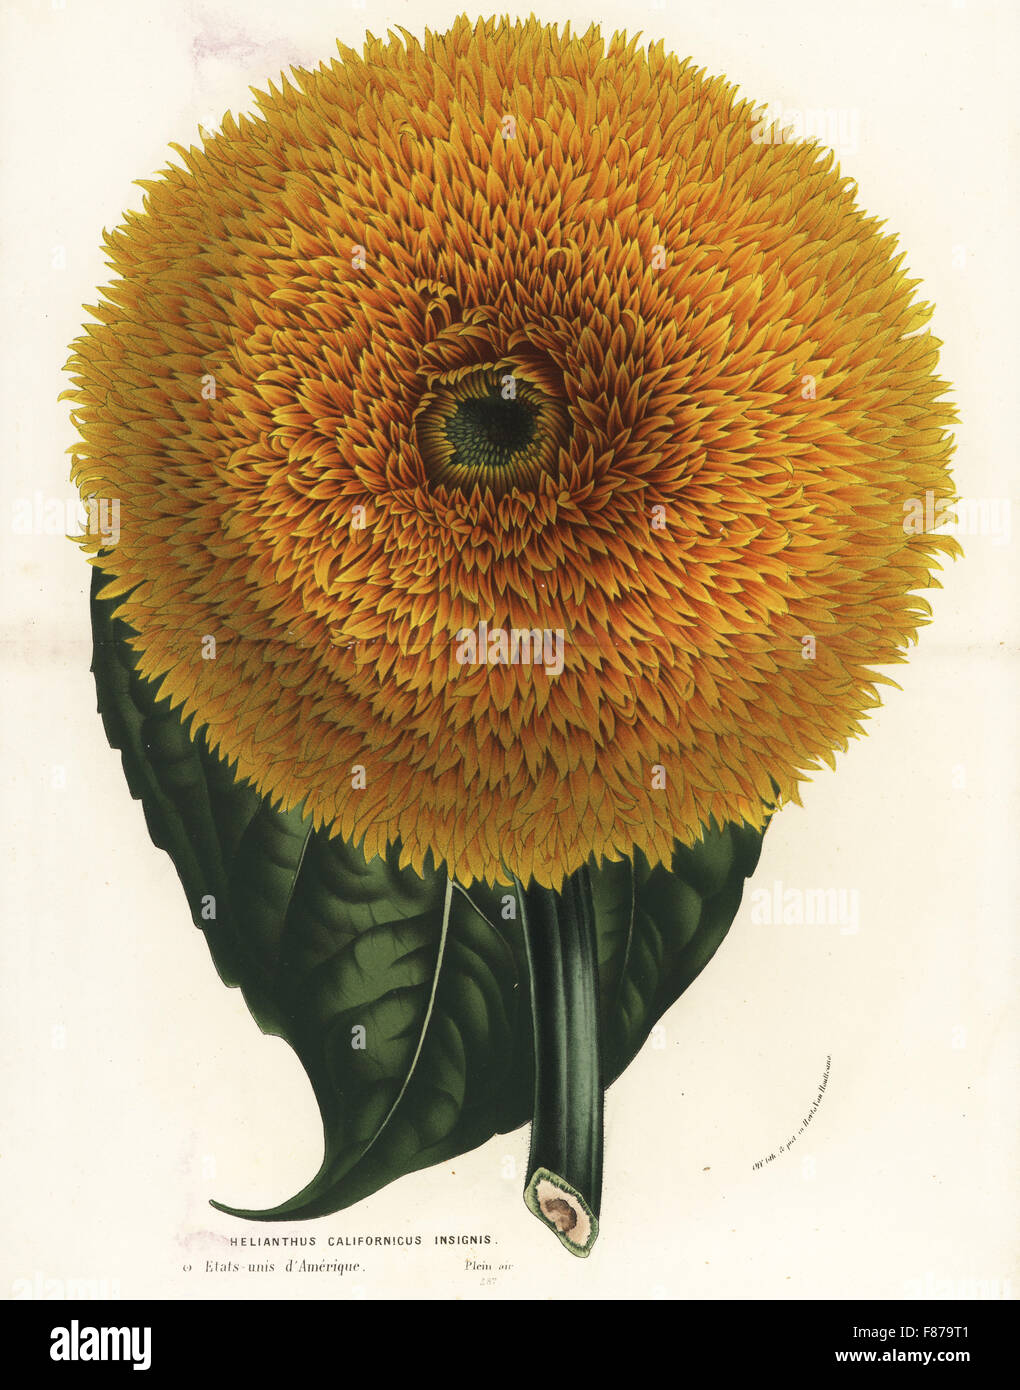 California sunflower, Helianthus californicus insignis. Handcoloured lithograph from Louis van Houtte and Charles Lemaire's Flowers of the Gardens and Hothouses of Europe, Flore des Serres et des Jardins de l'Europe, Ghent, Belgium, 1862-65. Stock Photo